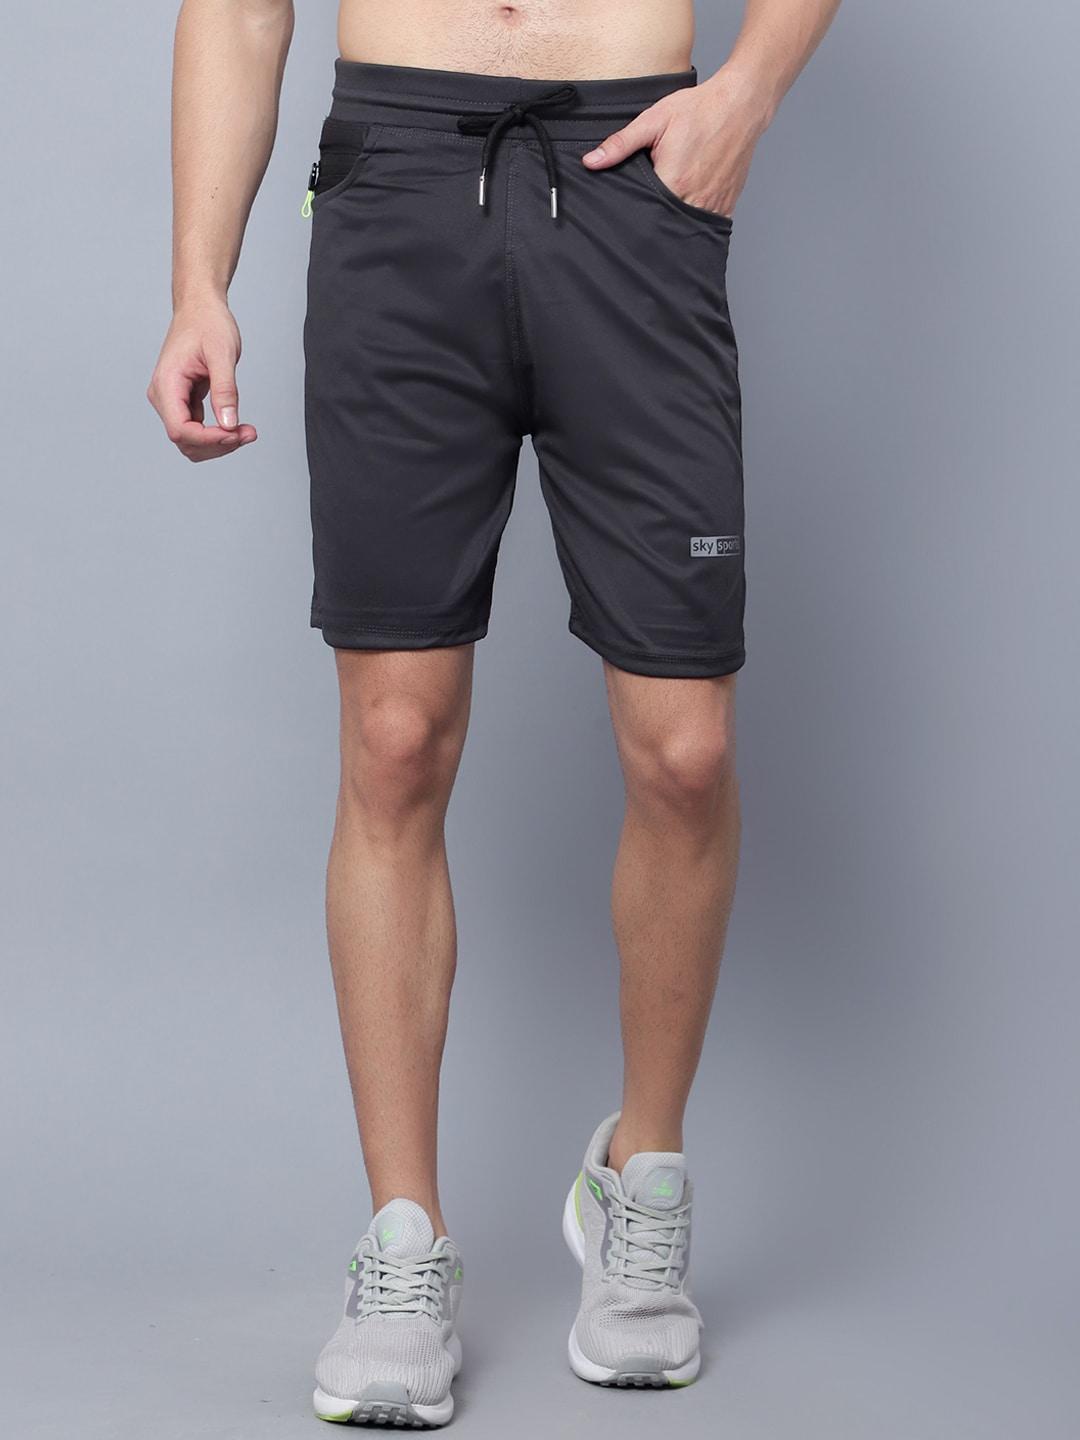 sky heights men slim fit training or gym sports shorts